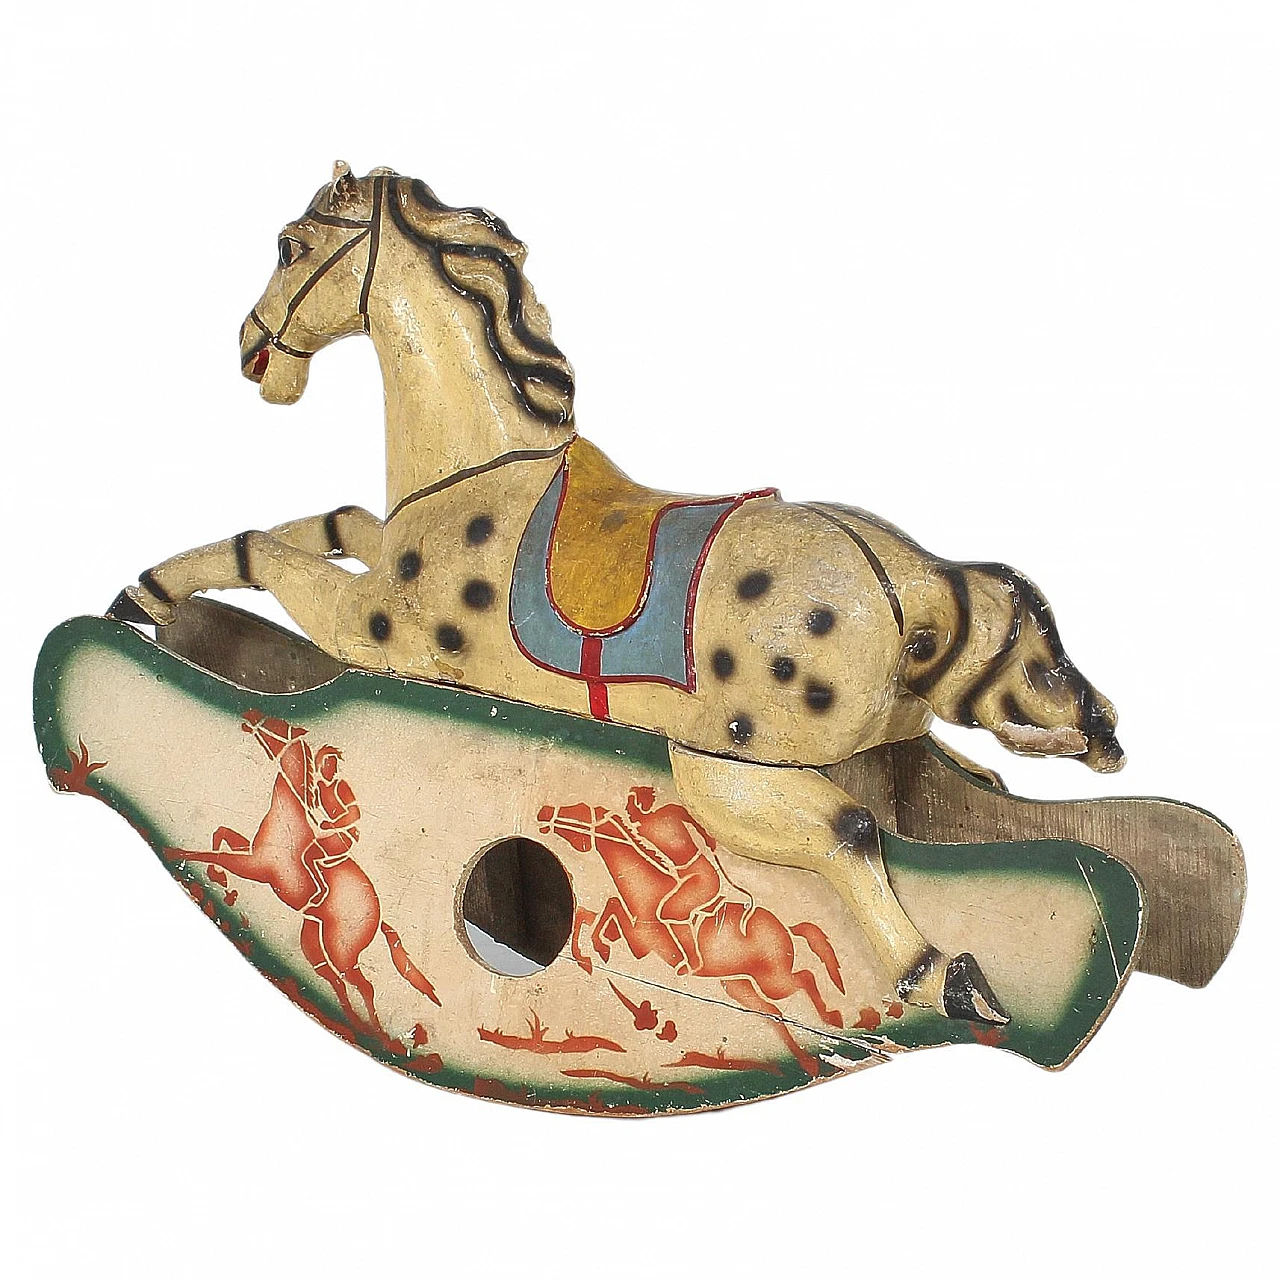 Rocking horse made of papier-mâché, metal and wood, mid-19th century 2